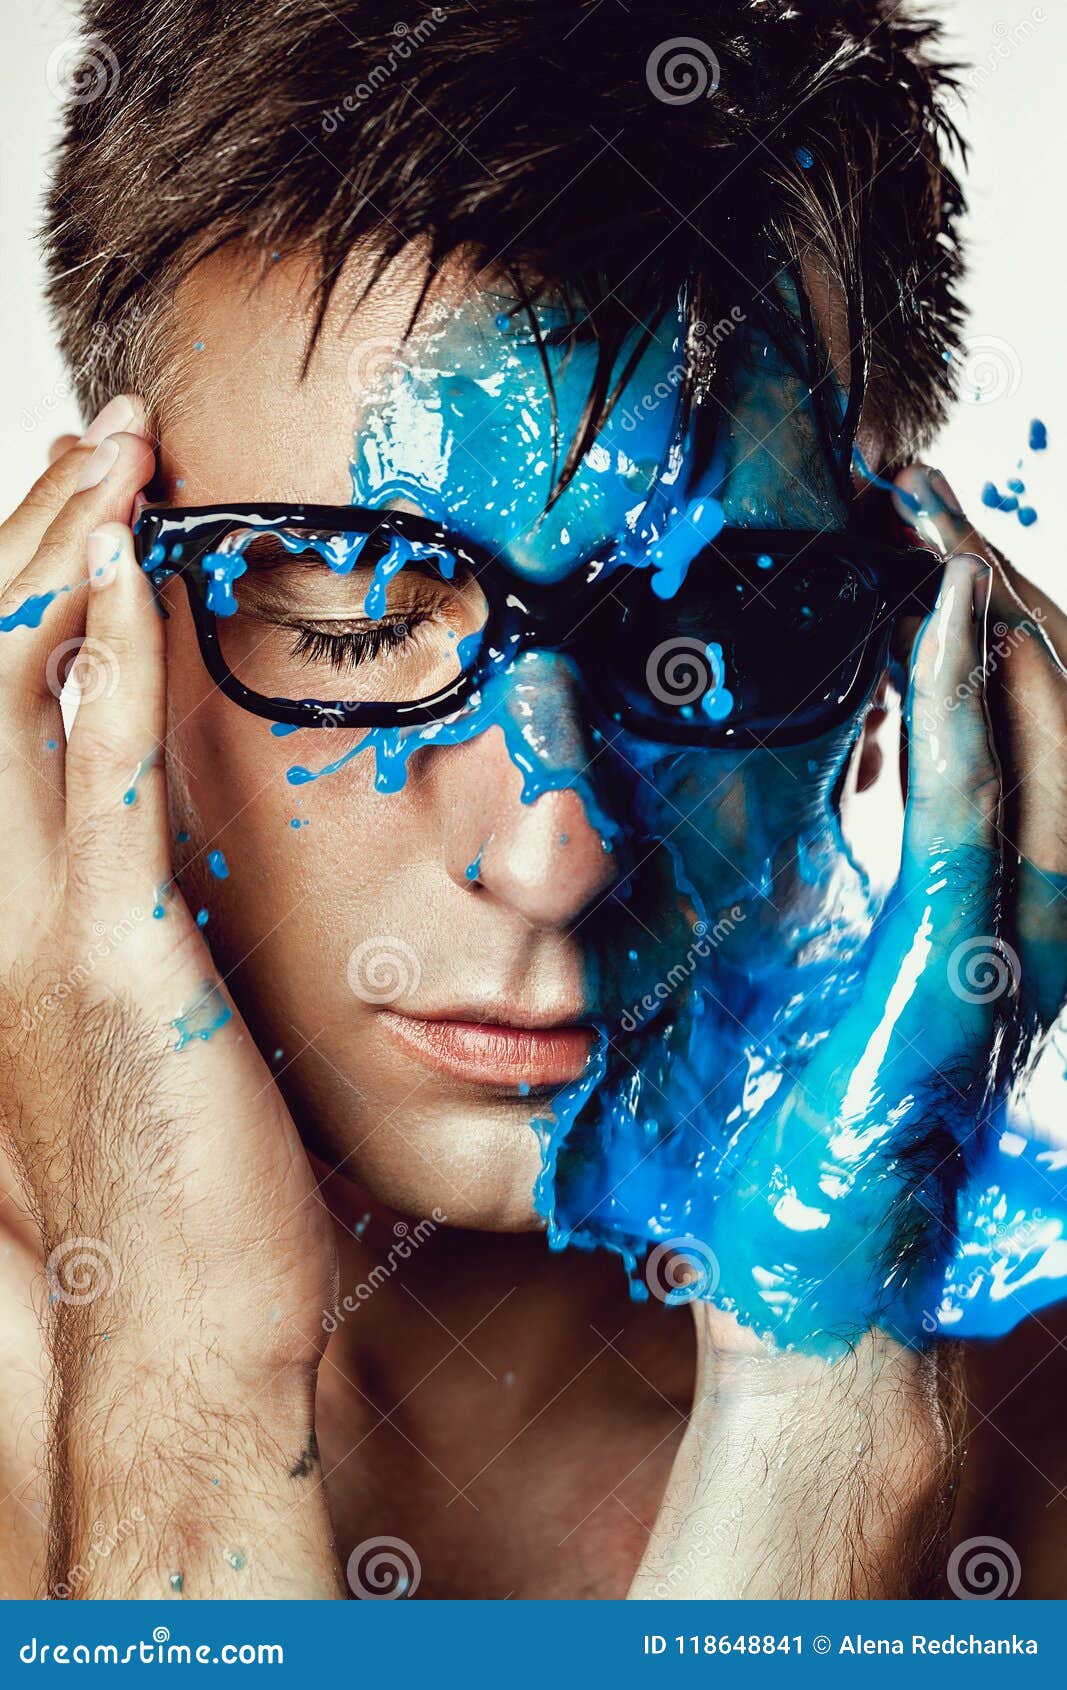 Blue Paint Over Face Man Model Abstract on White Background Stock Image - Image of beauty, close: